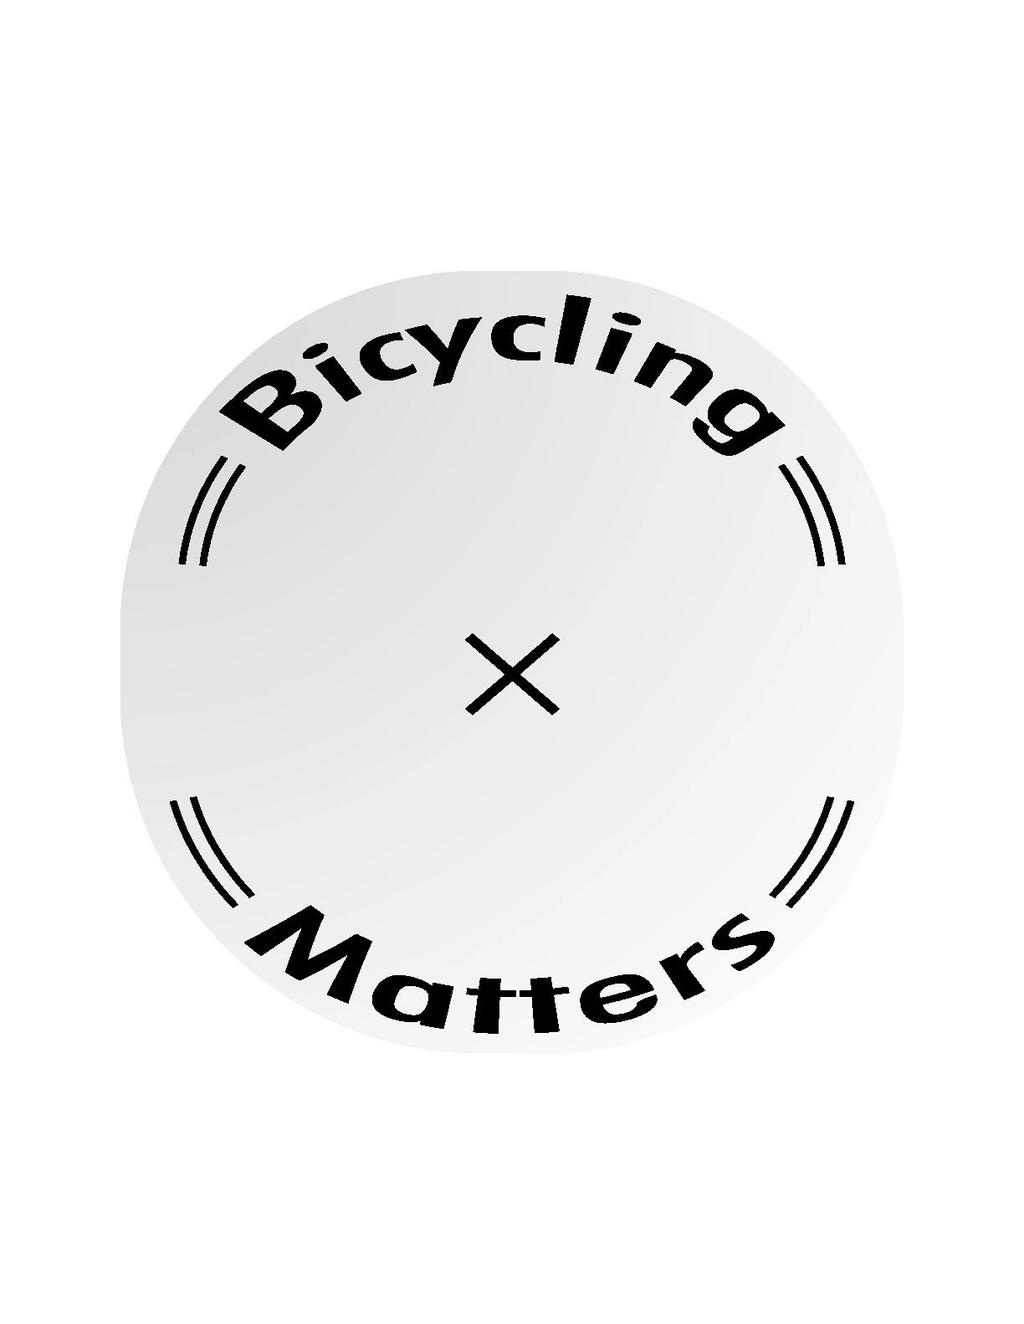 Critique of the 2012 AASHTO Guide for the Development of Bicycle